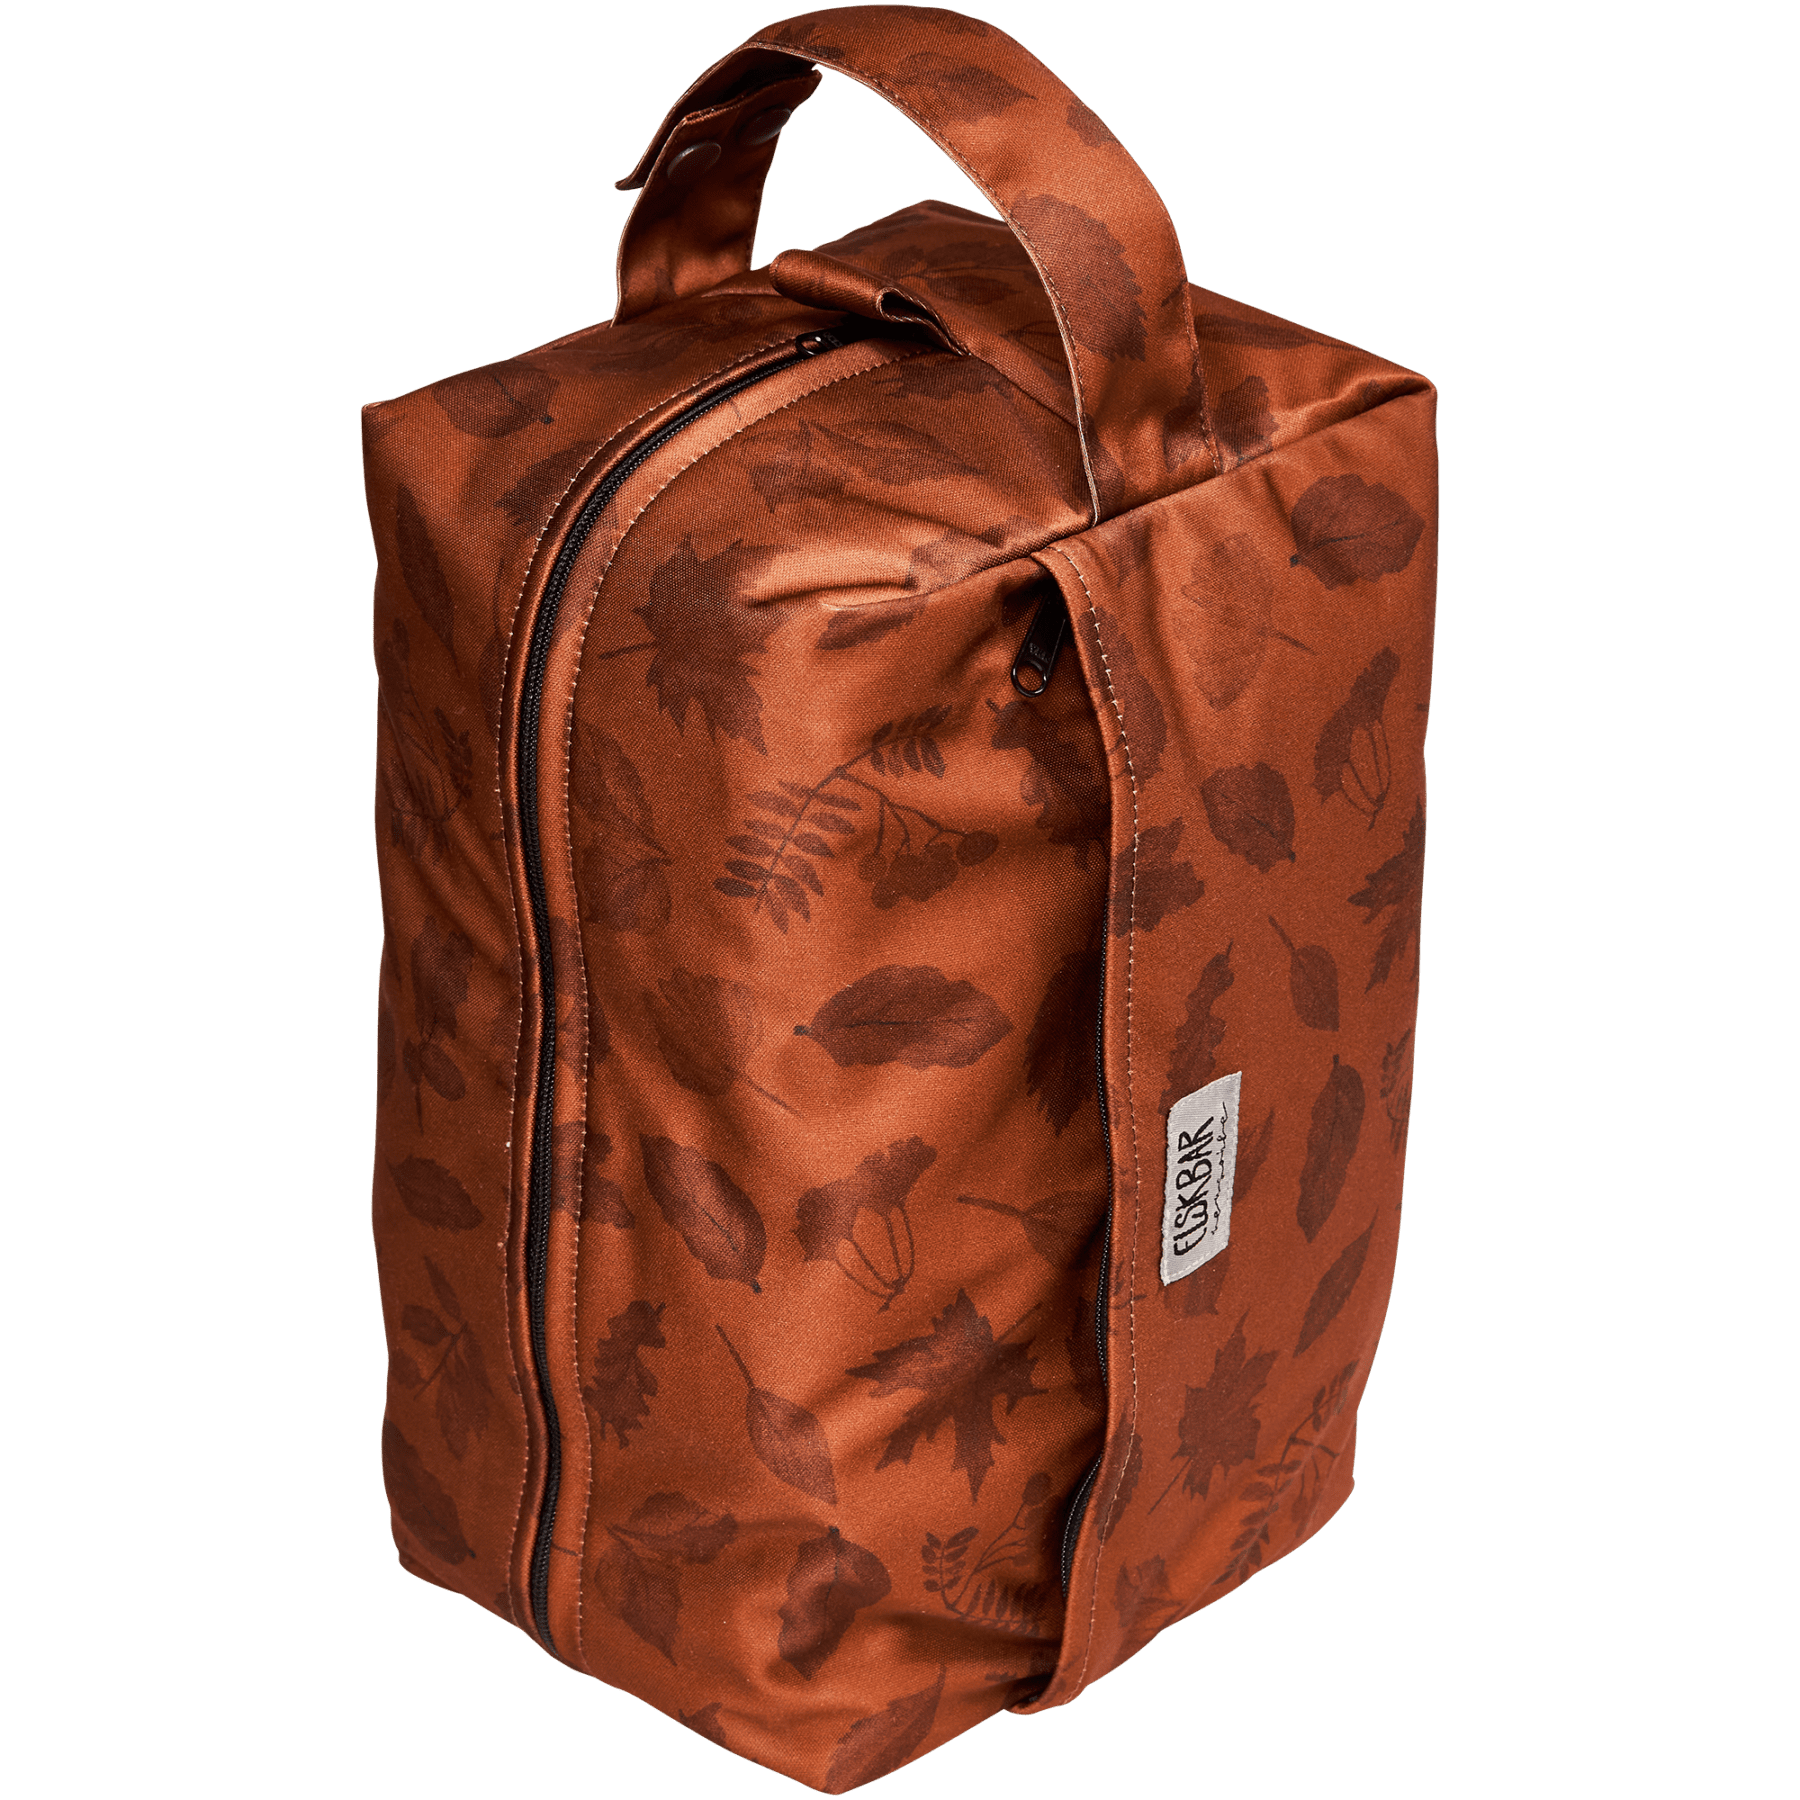 Pod wetbag for cloth diapers - leaves